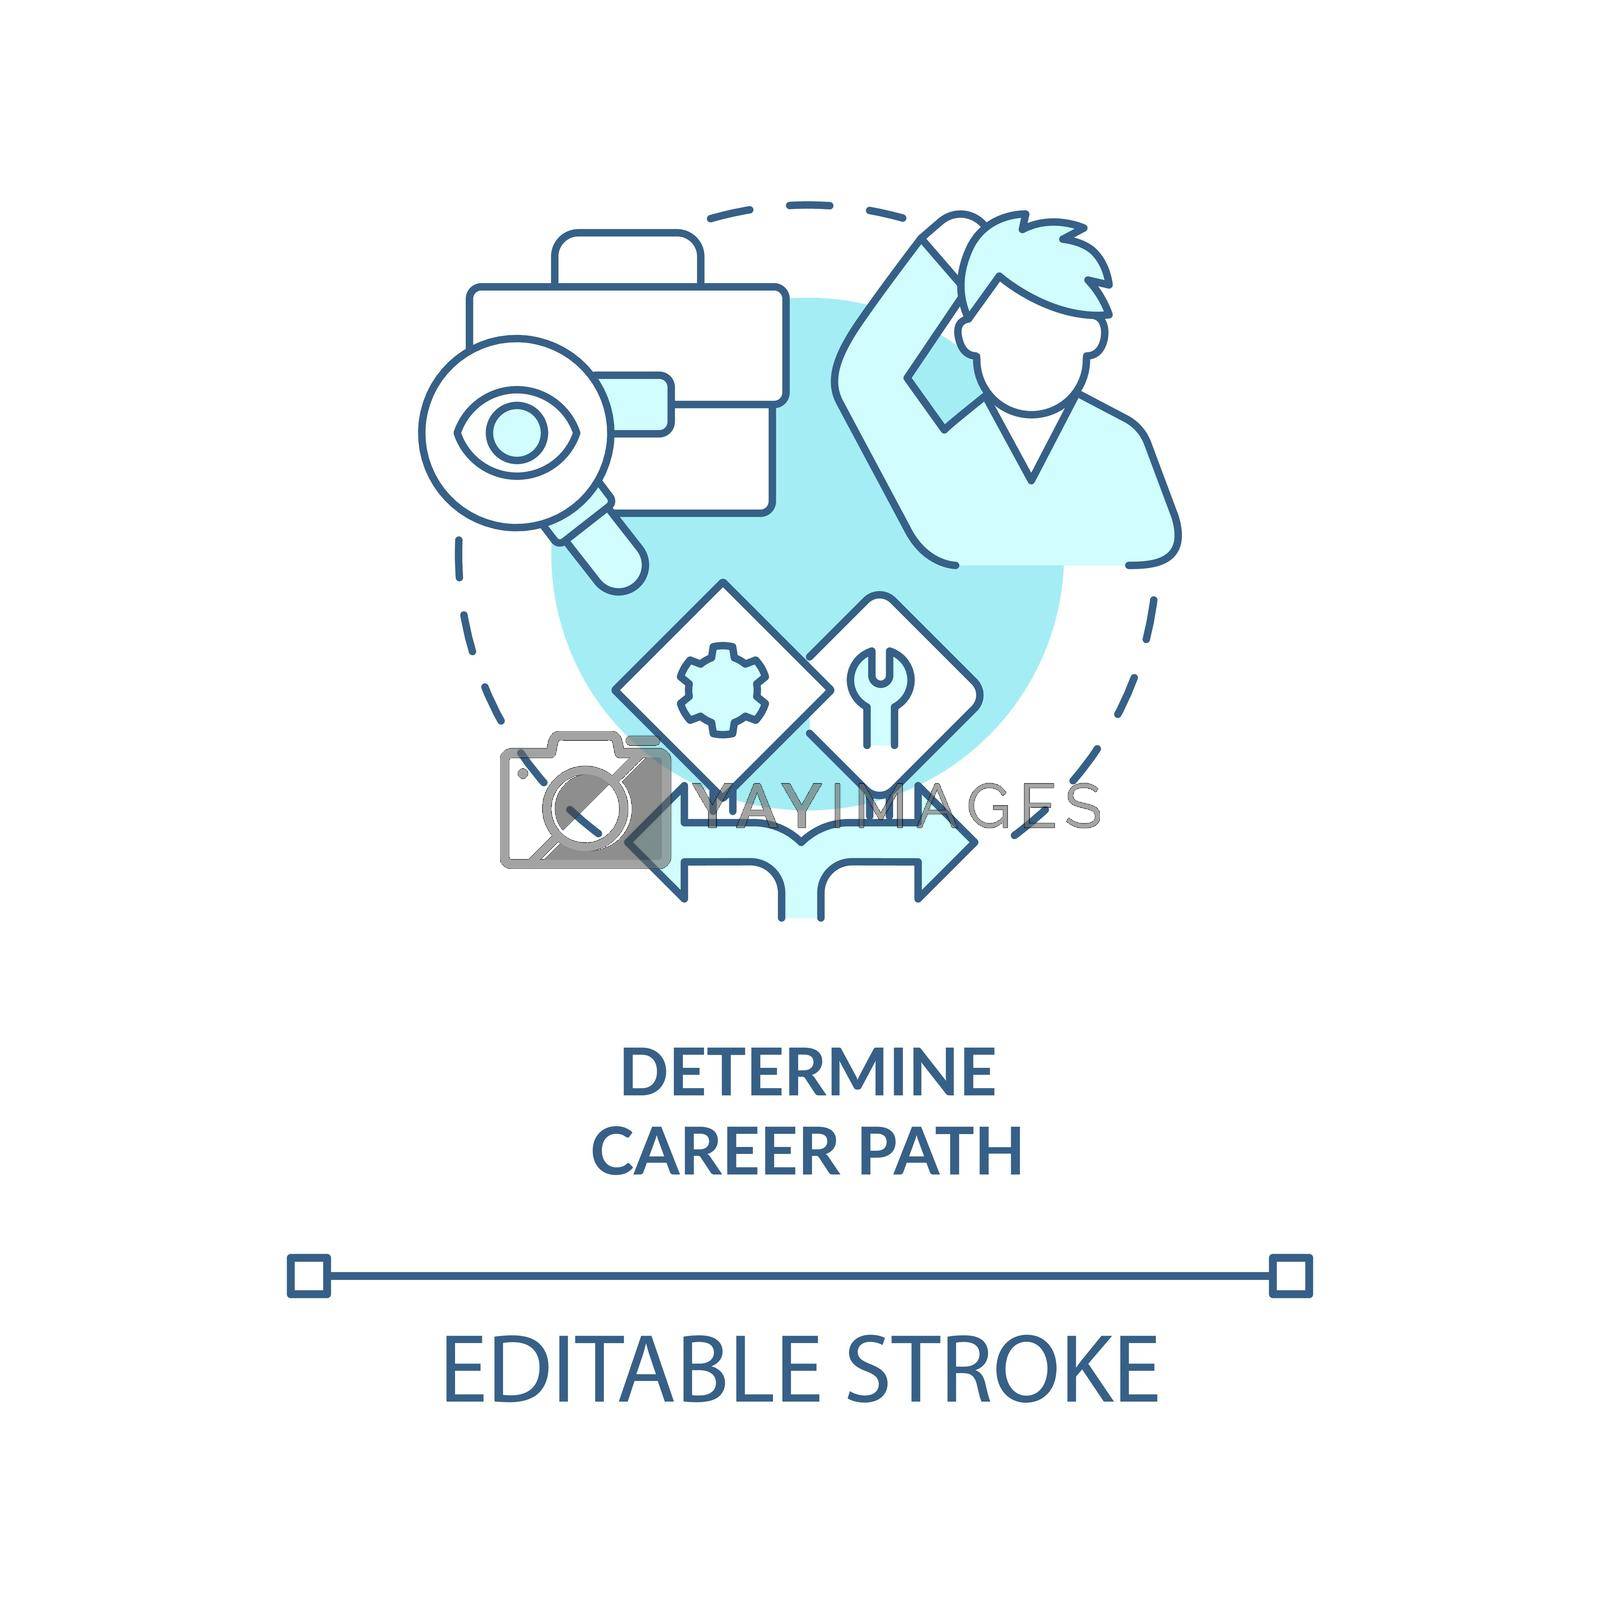 Royalty free image of Determine career path turquoise concept icon by bsd